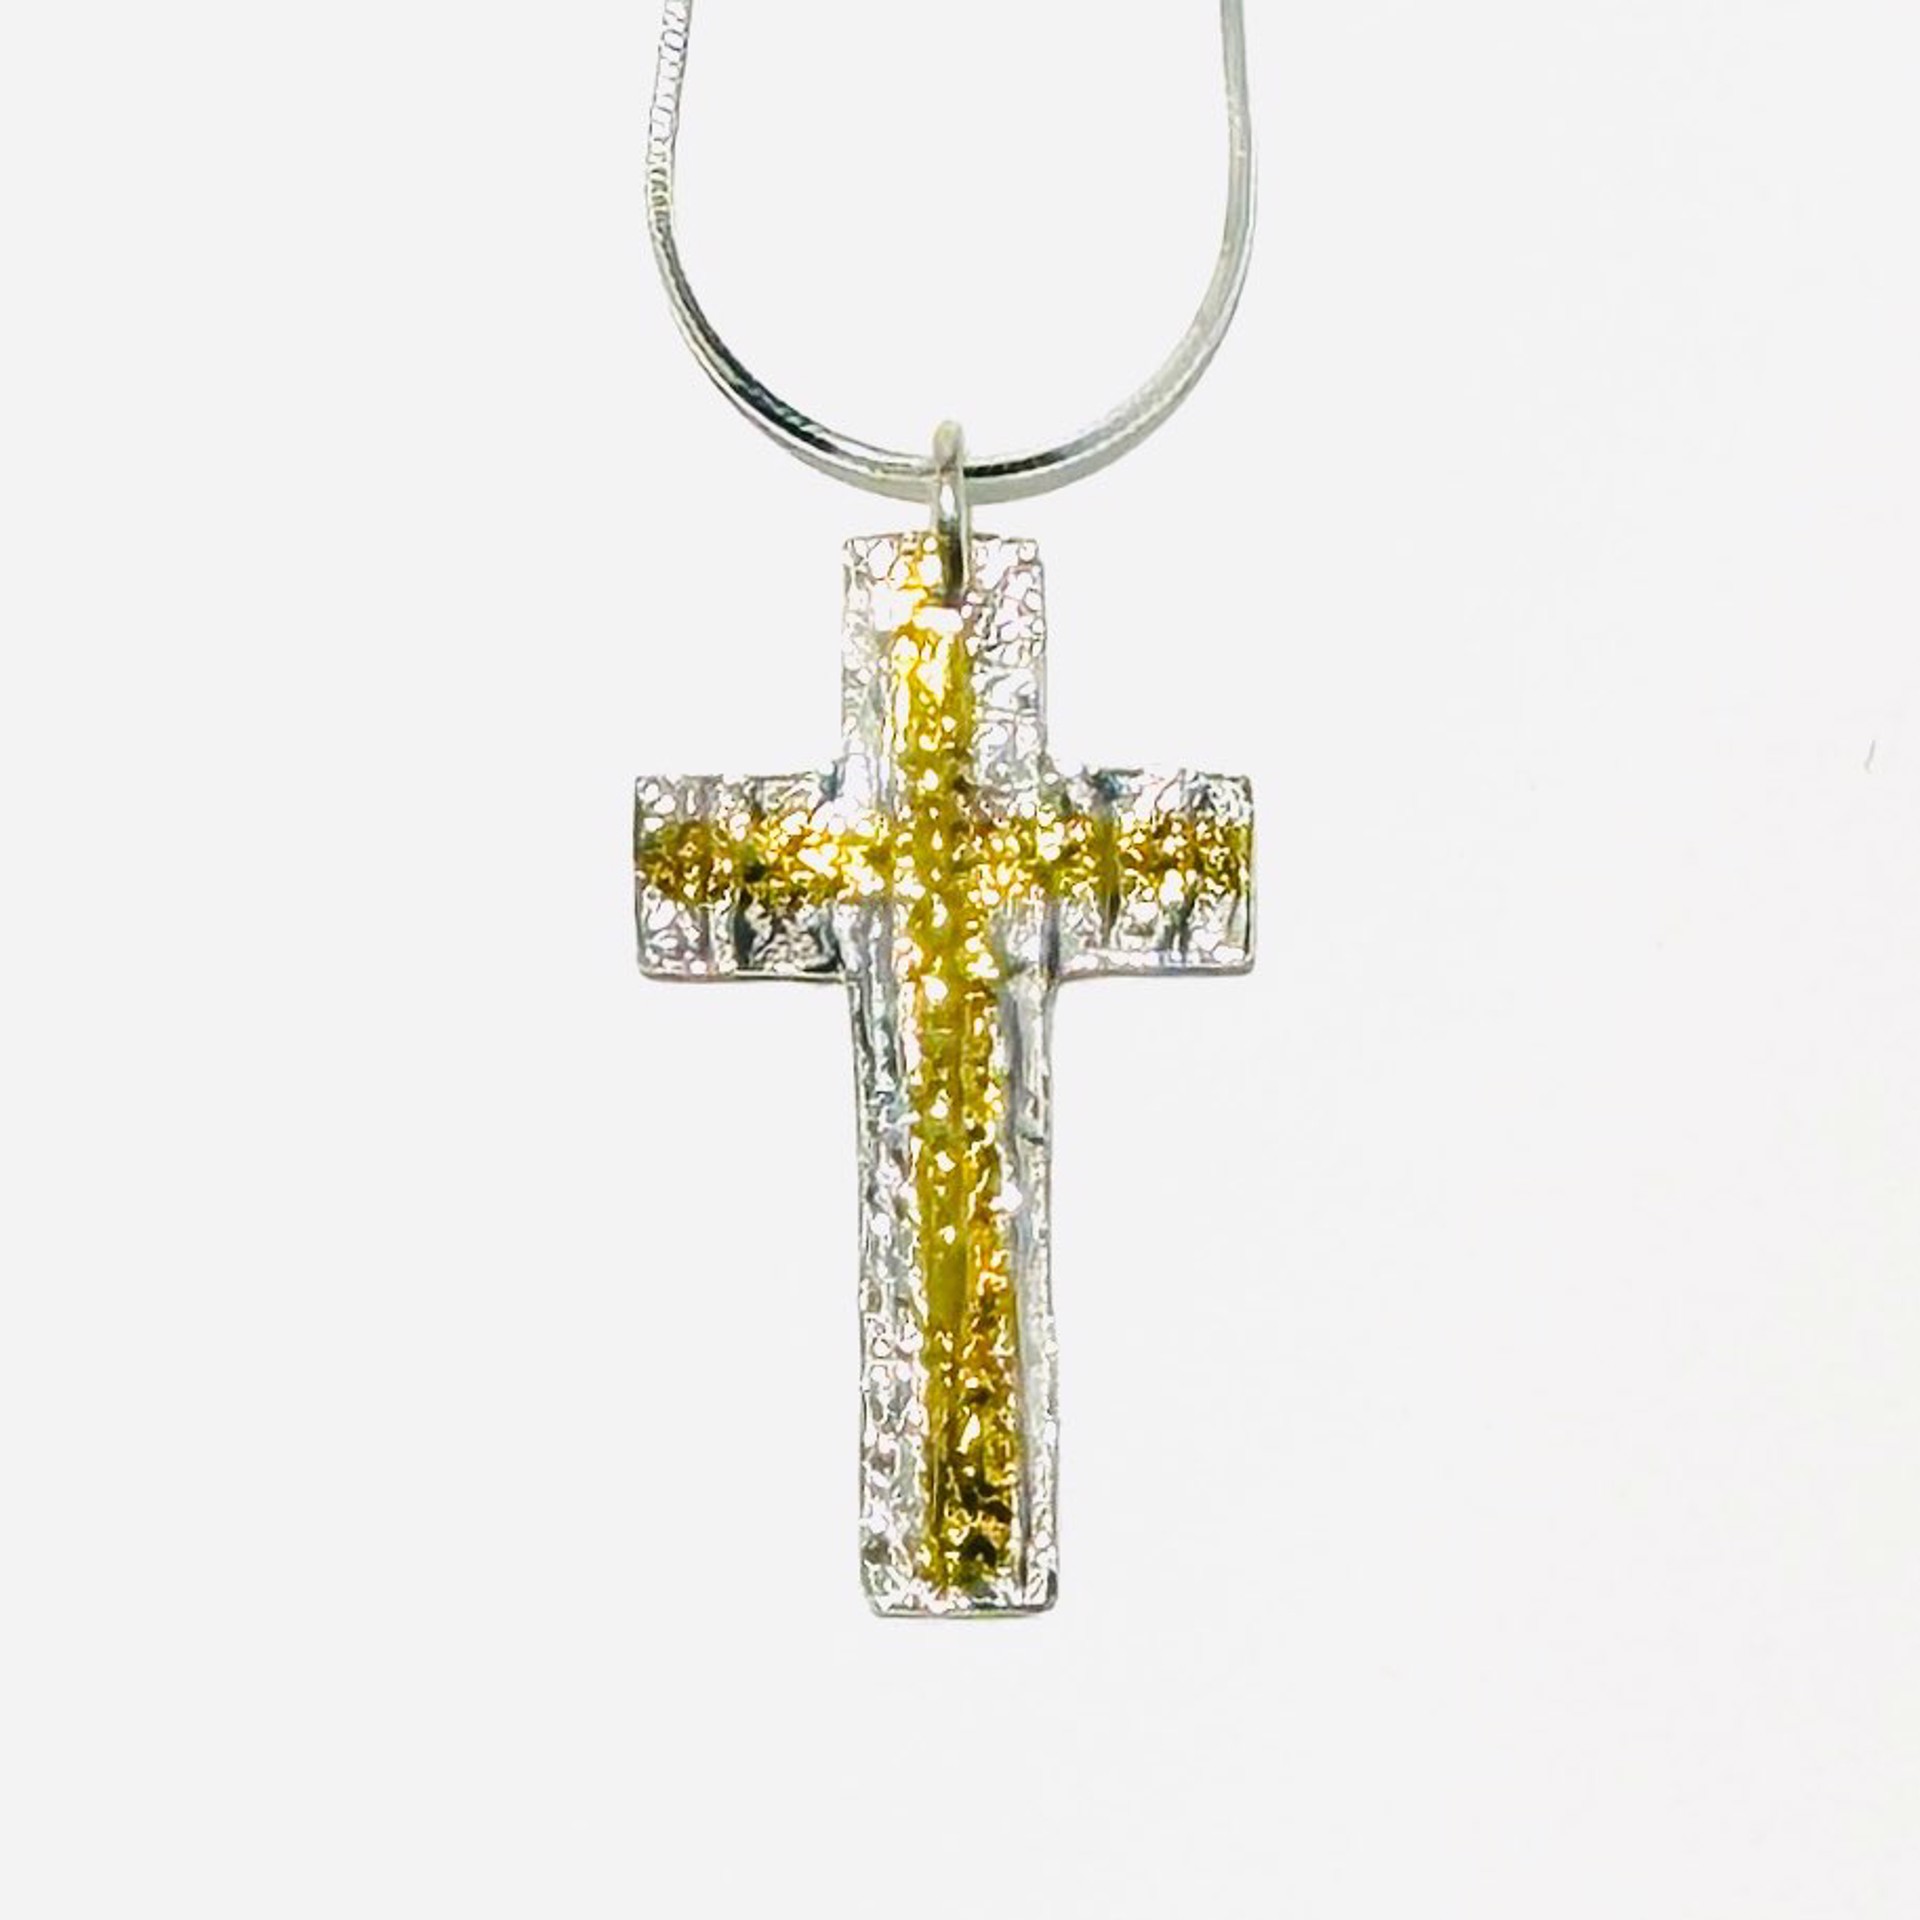 Keum-boo Fine Silver and Gold Cross Necklace KH23-40 by Karen Hakim